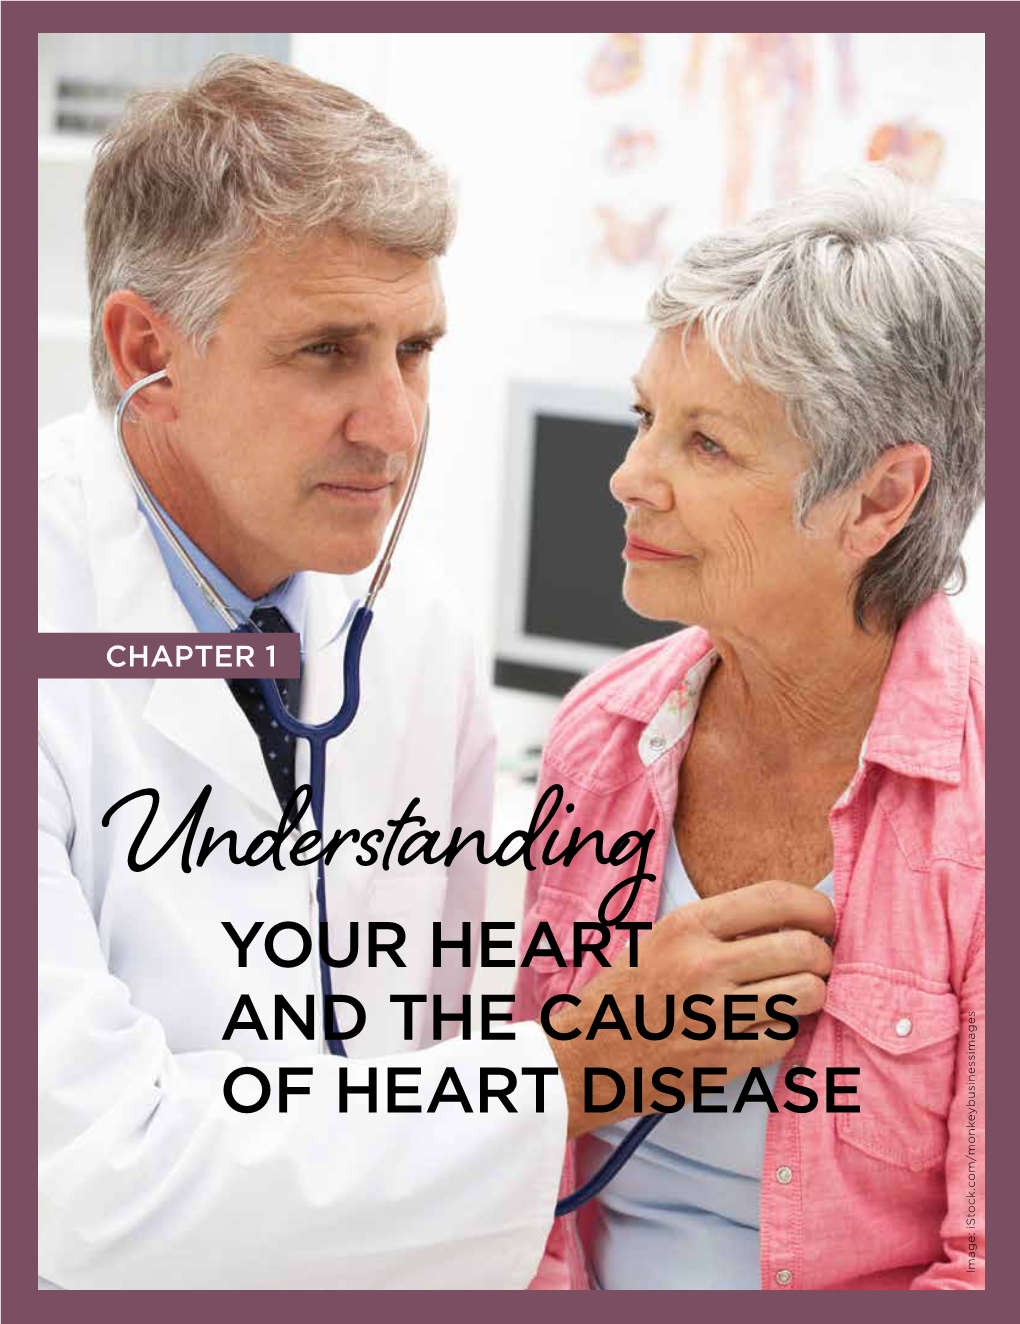 Your Heart and the Causes of Heart Disease